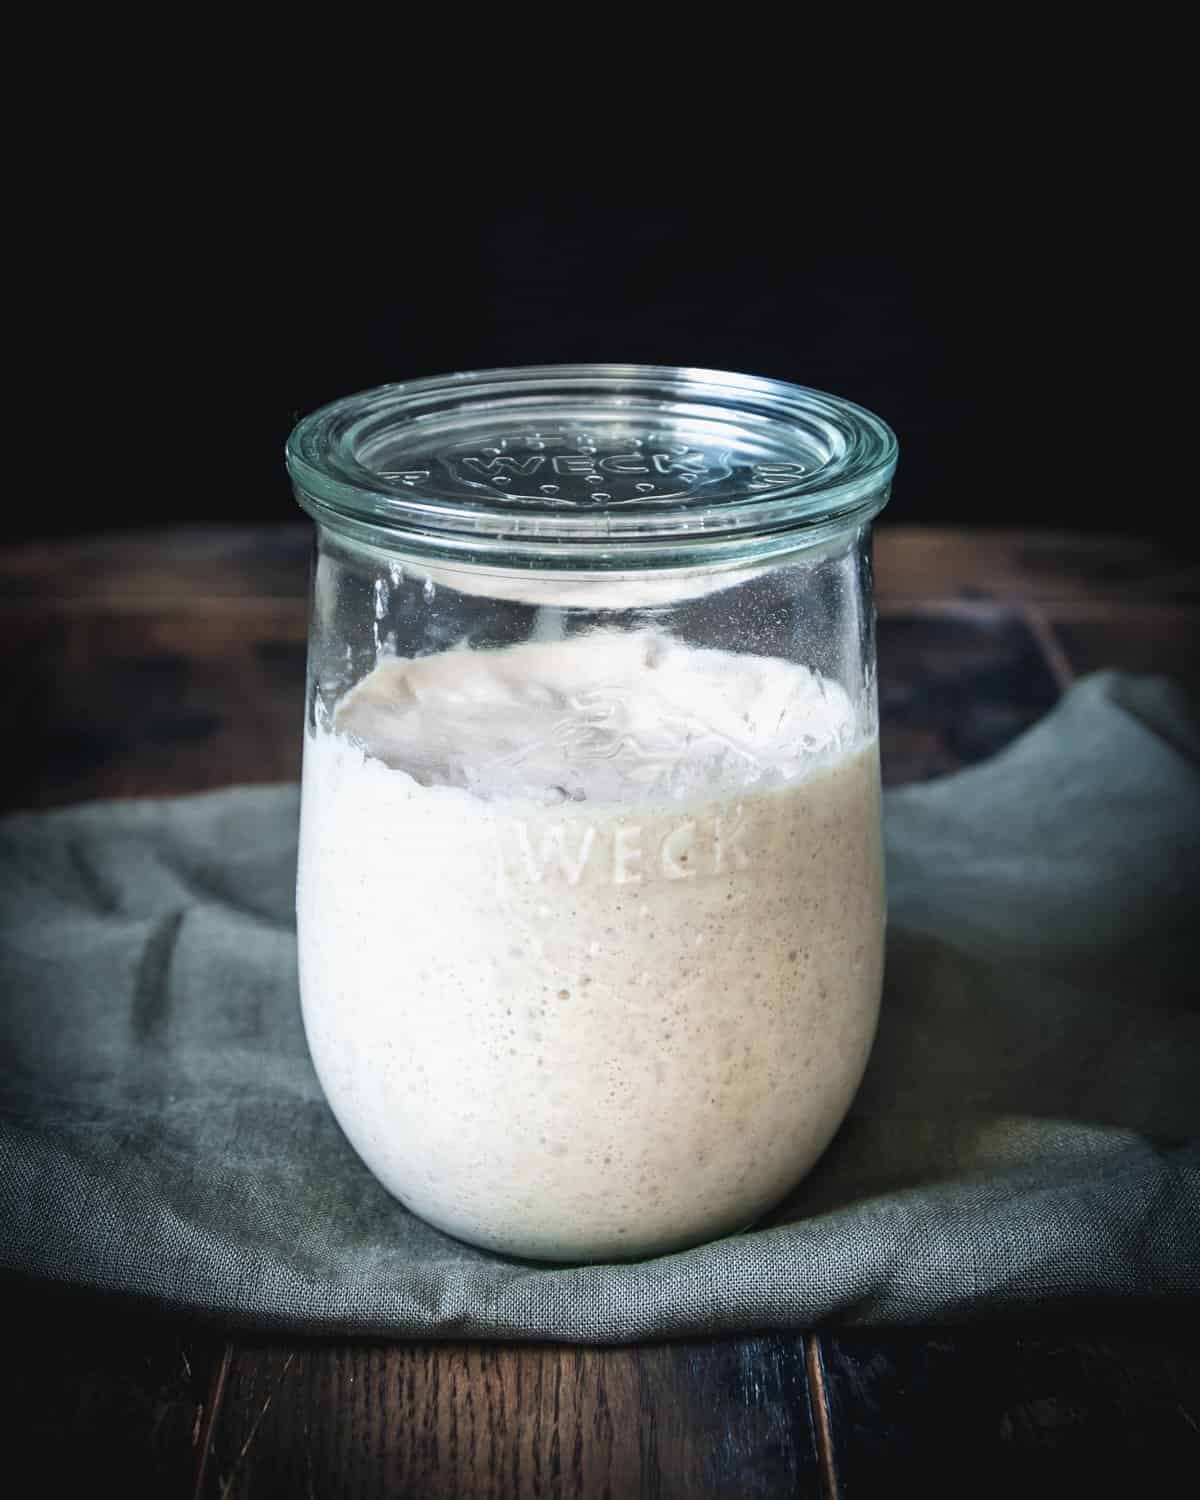 Sourdough starter in a jar with a lid, sitting on a forest green cloth on a wood surface.